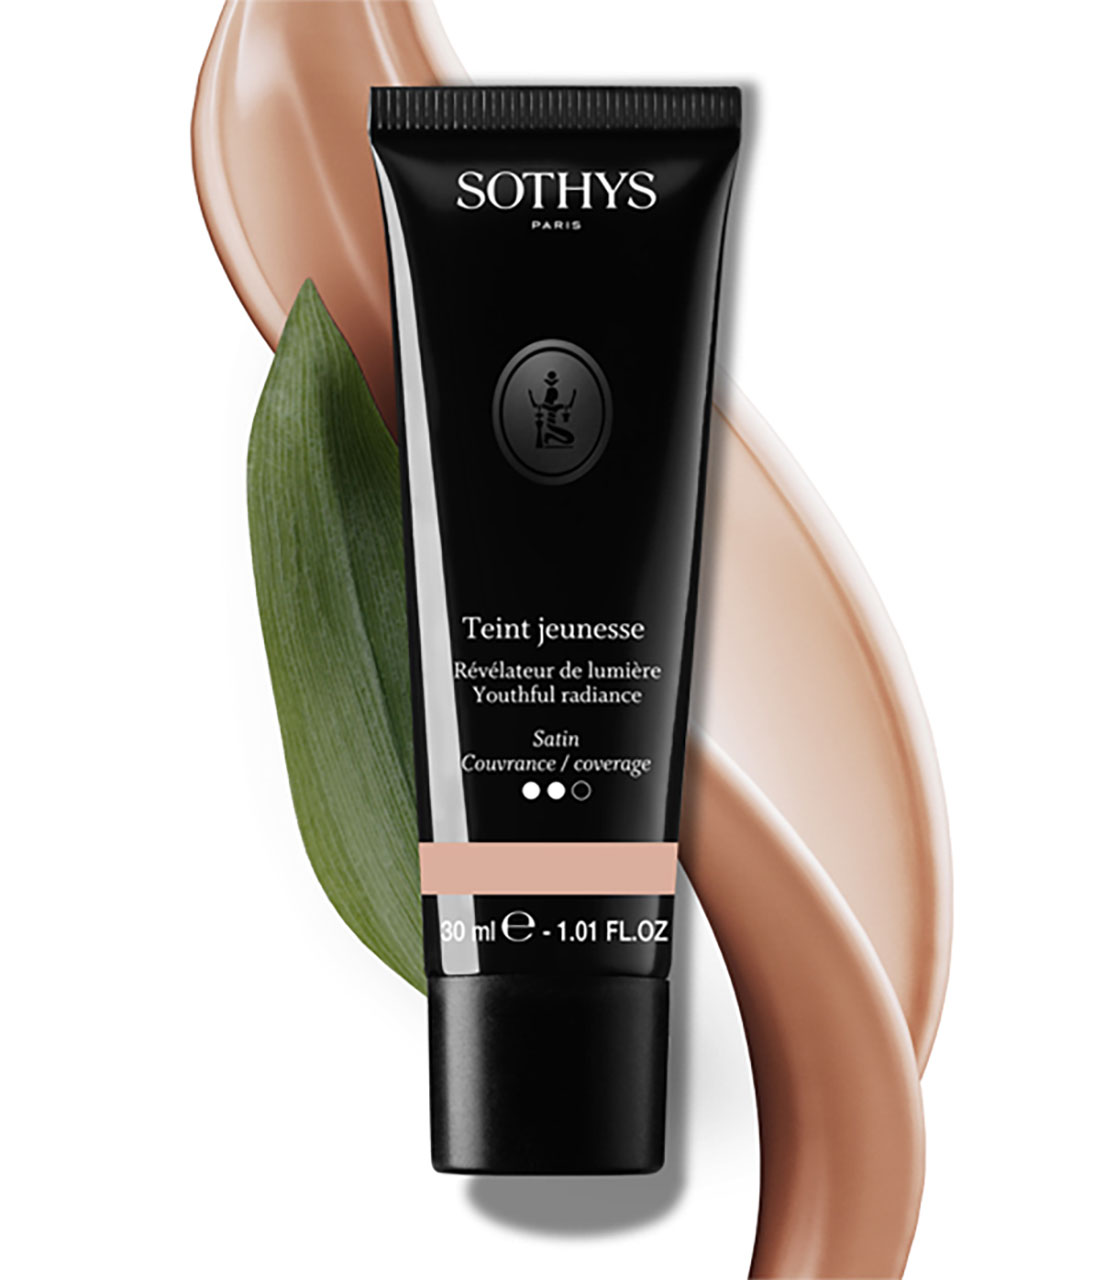 I typically wear the natural glowing in B20 but can never find.  what is equiv. color in Sothys Teint Jeunesse?